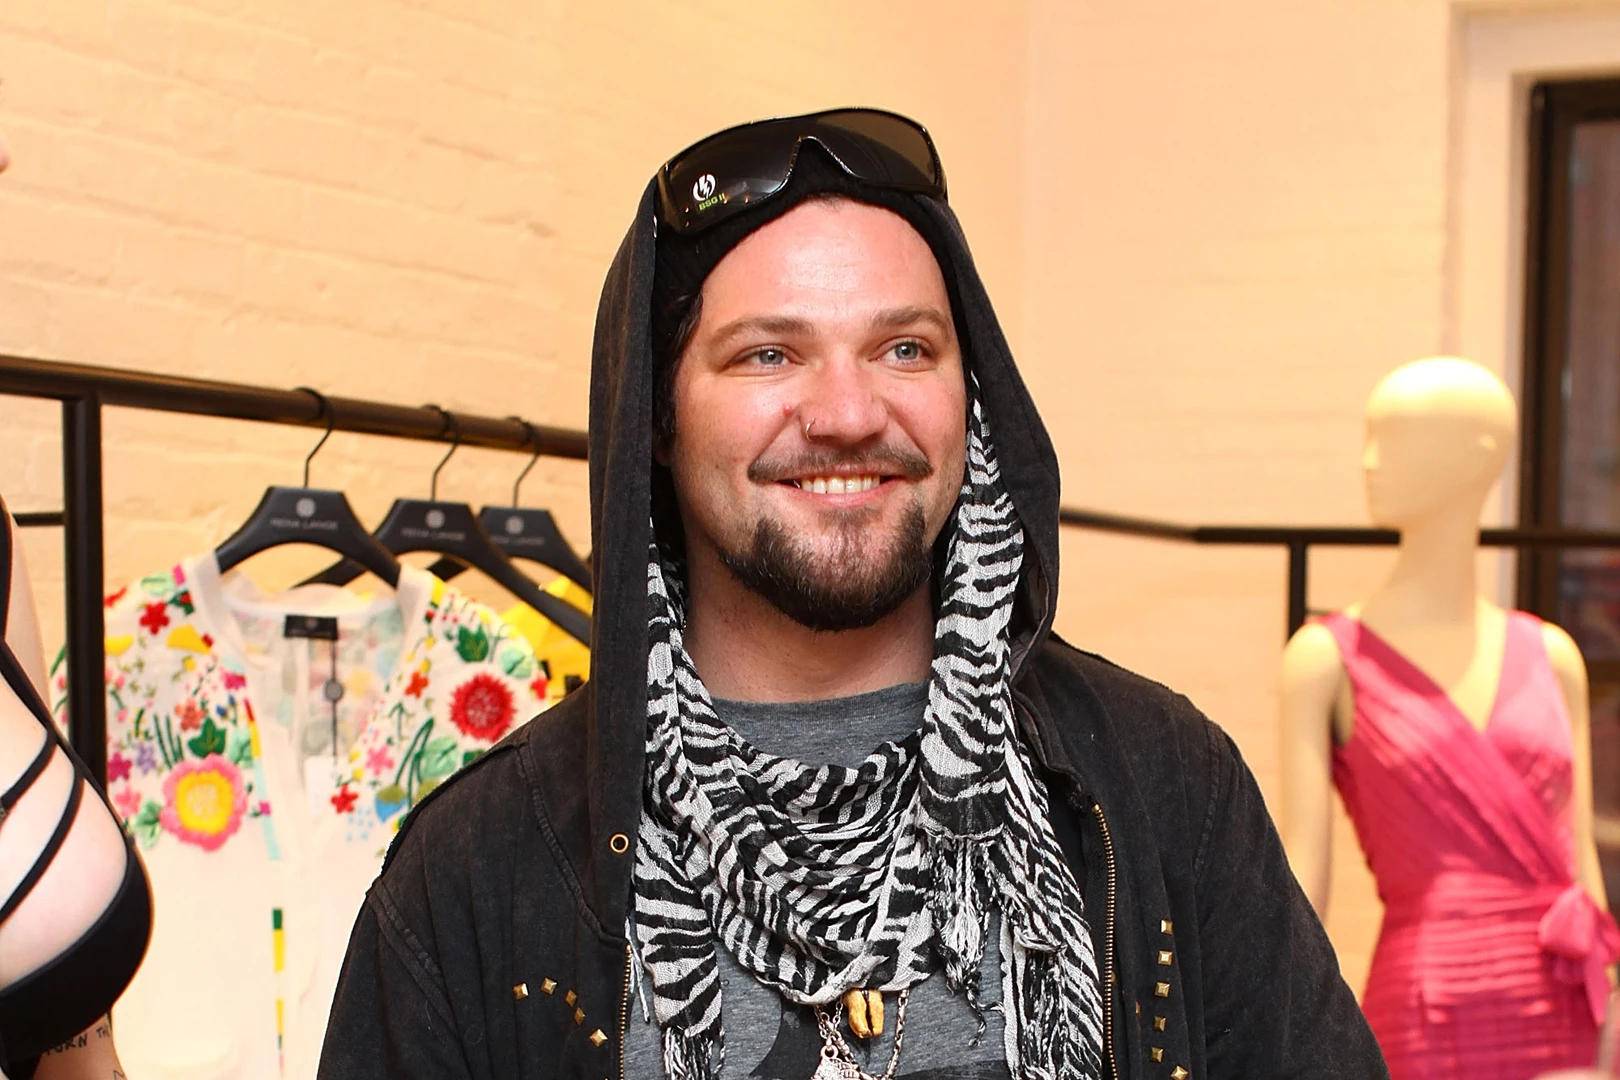 Margera Family Addresses 'Free Bam' Movement In New Statement